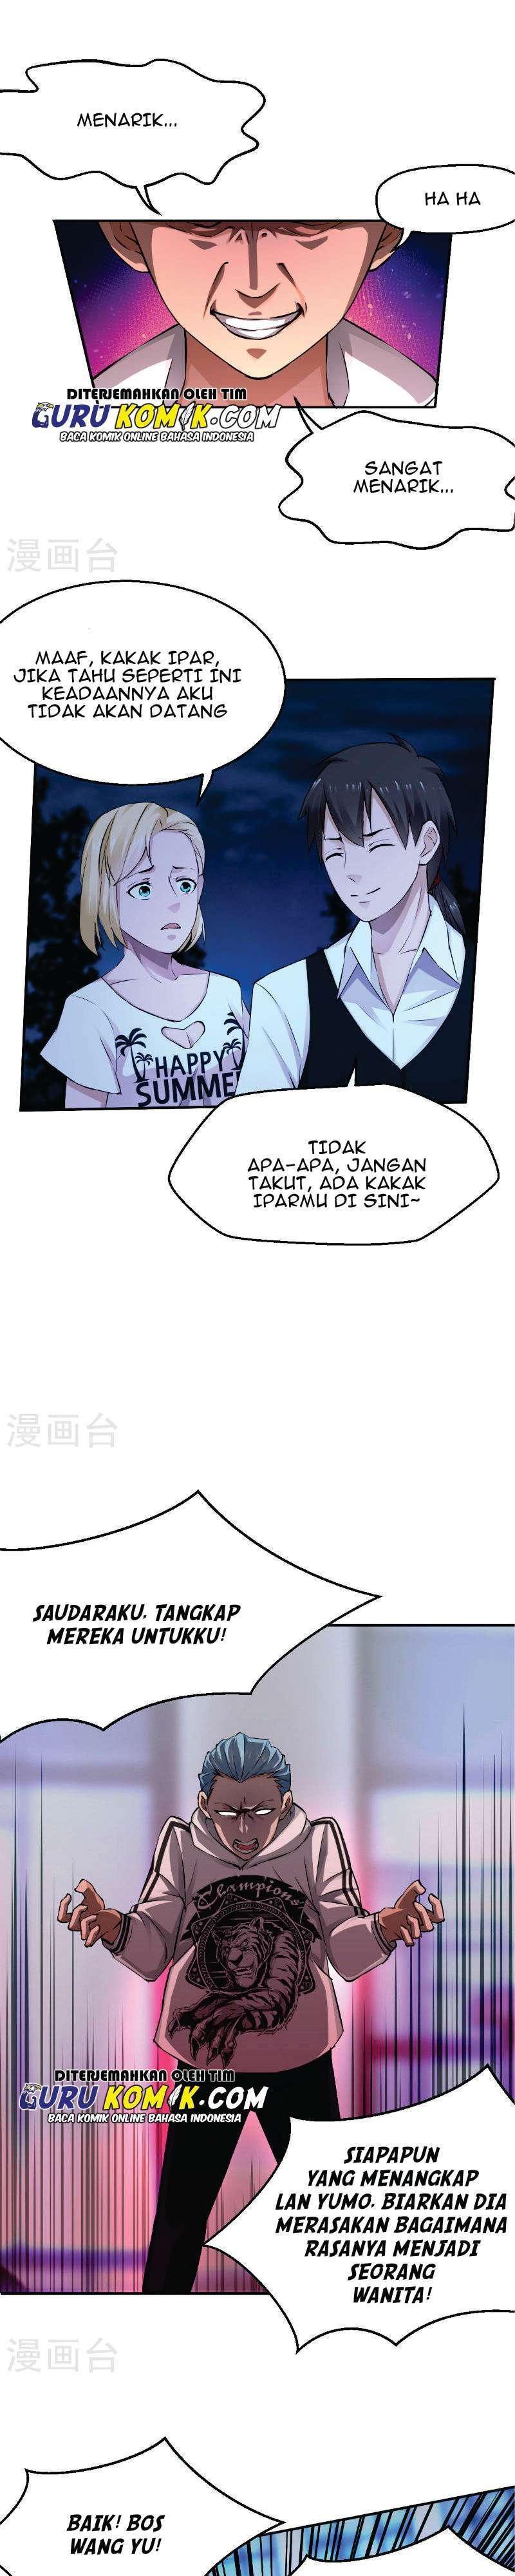 Close Mad Doctor Chapter 44 – 47